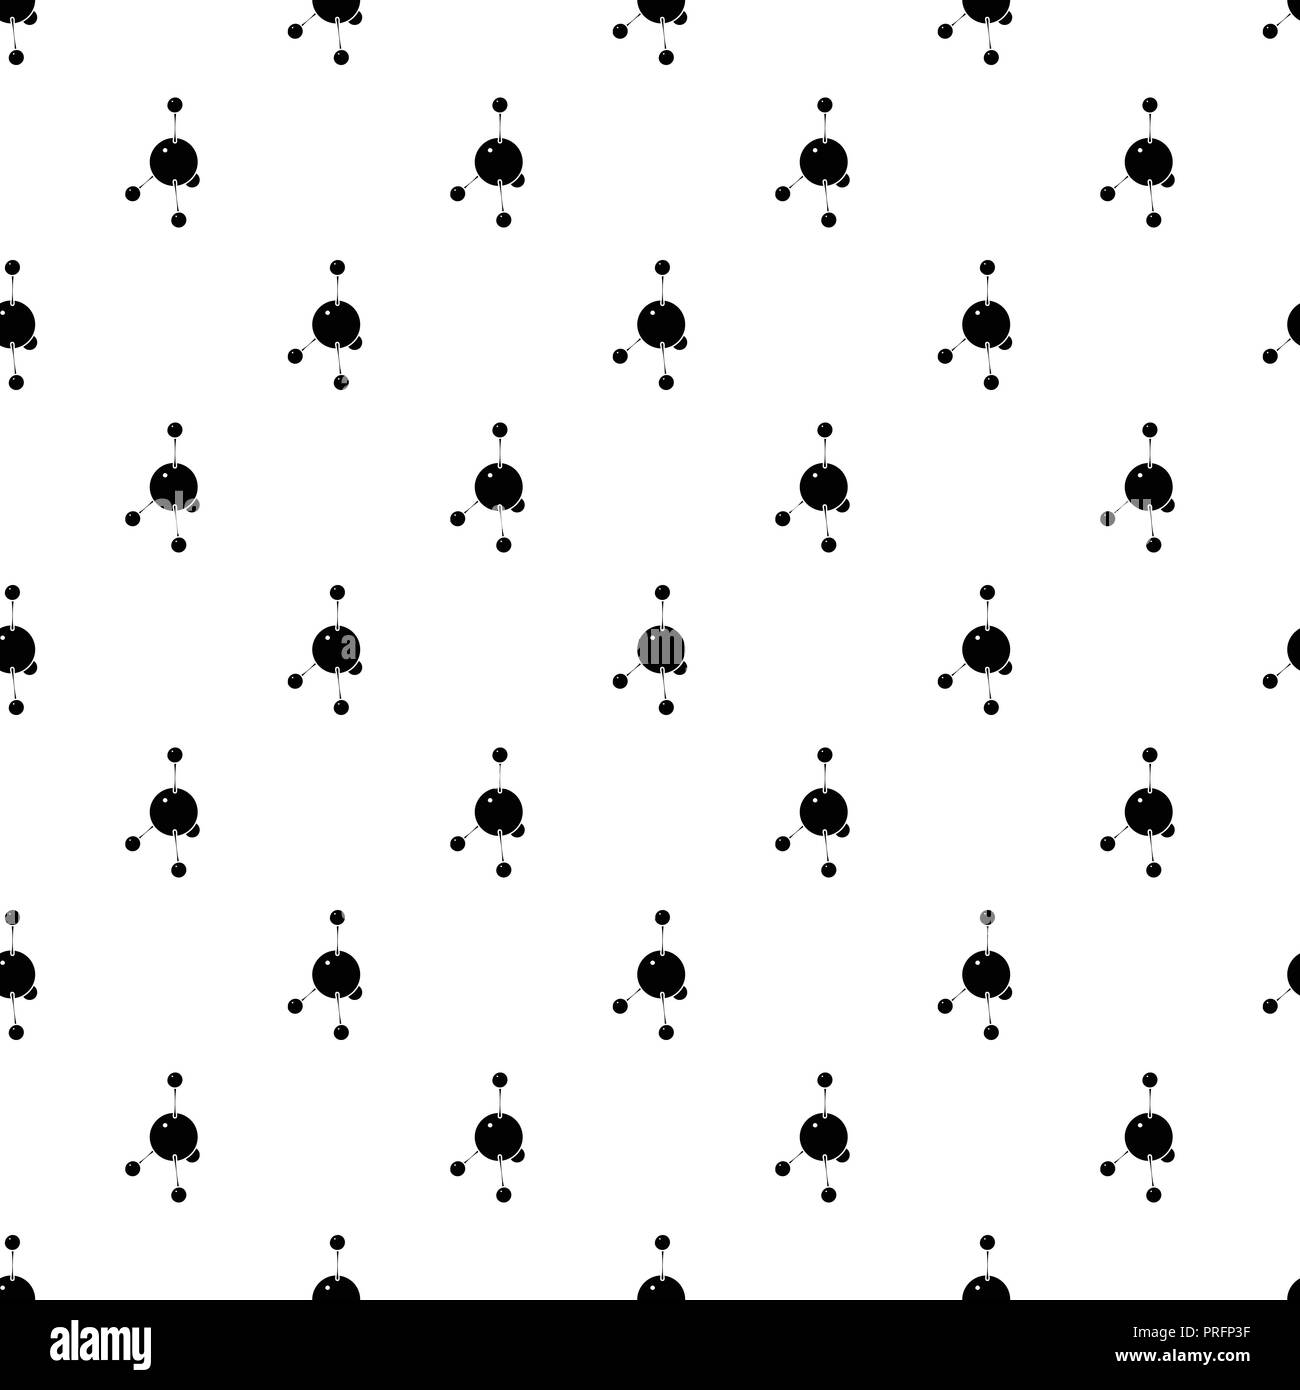 Acetone pattern vector seamless Stock Vector